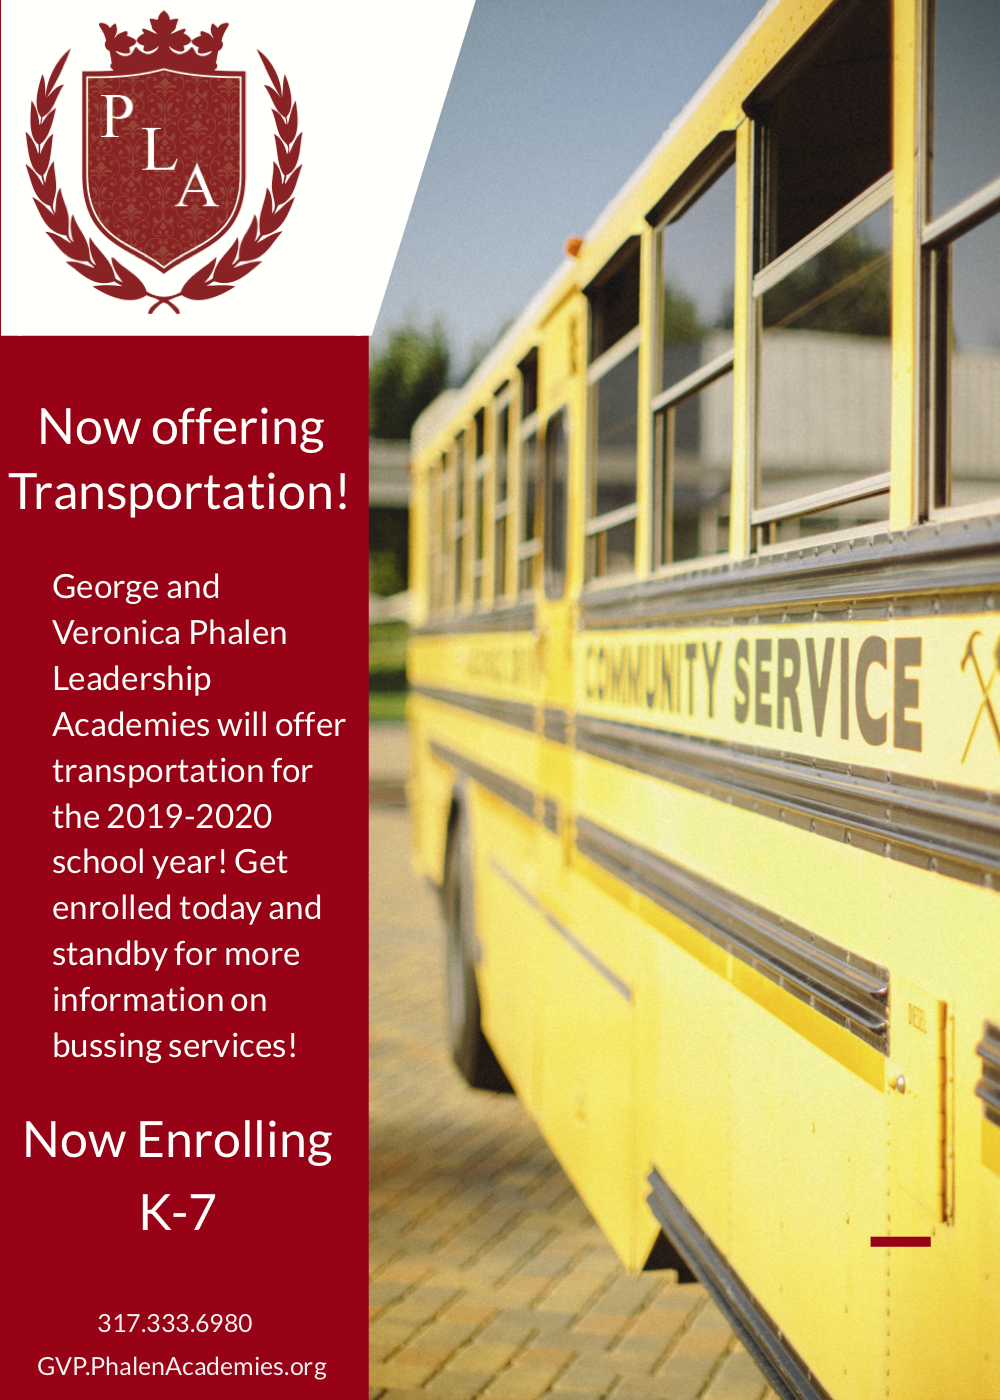 George and Veronica Phalen Leadership Academy will offer transportation services next year.  